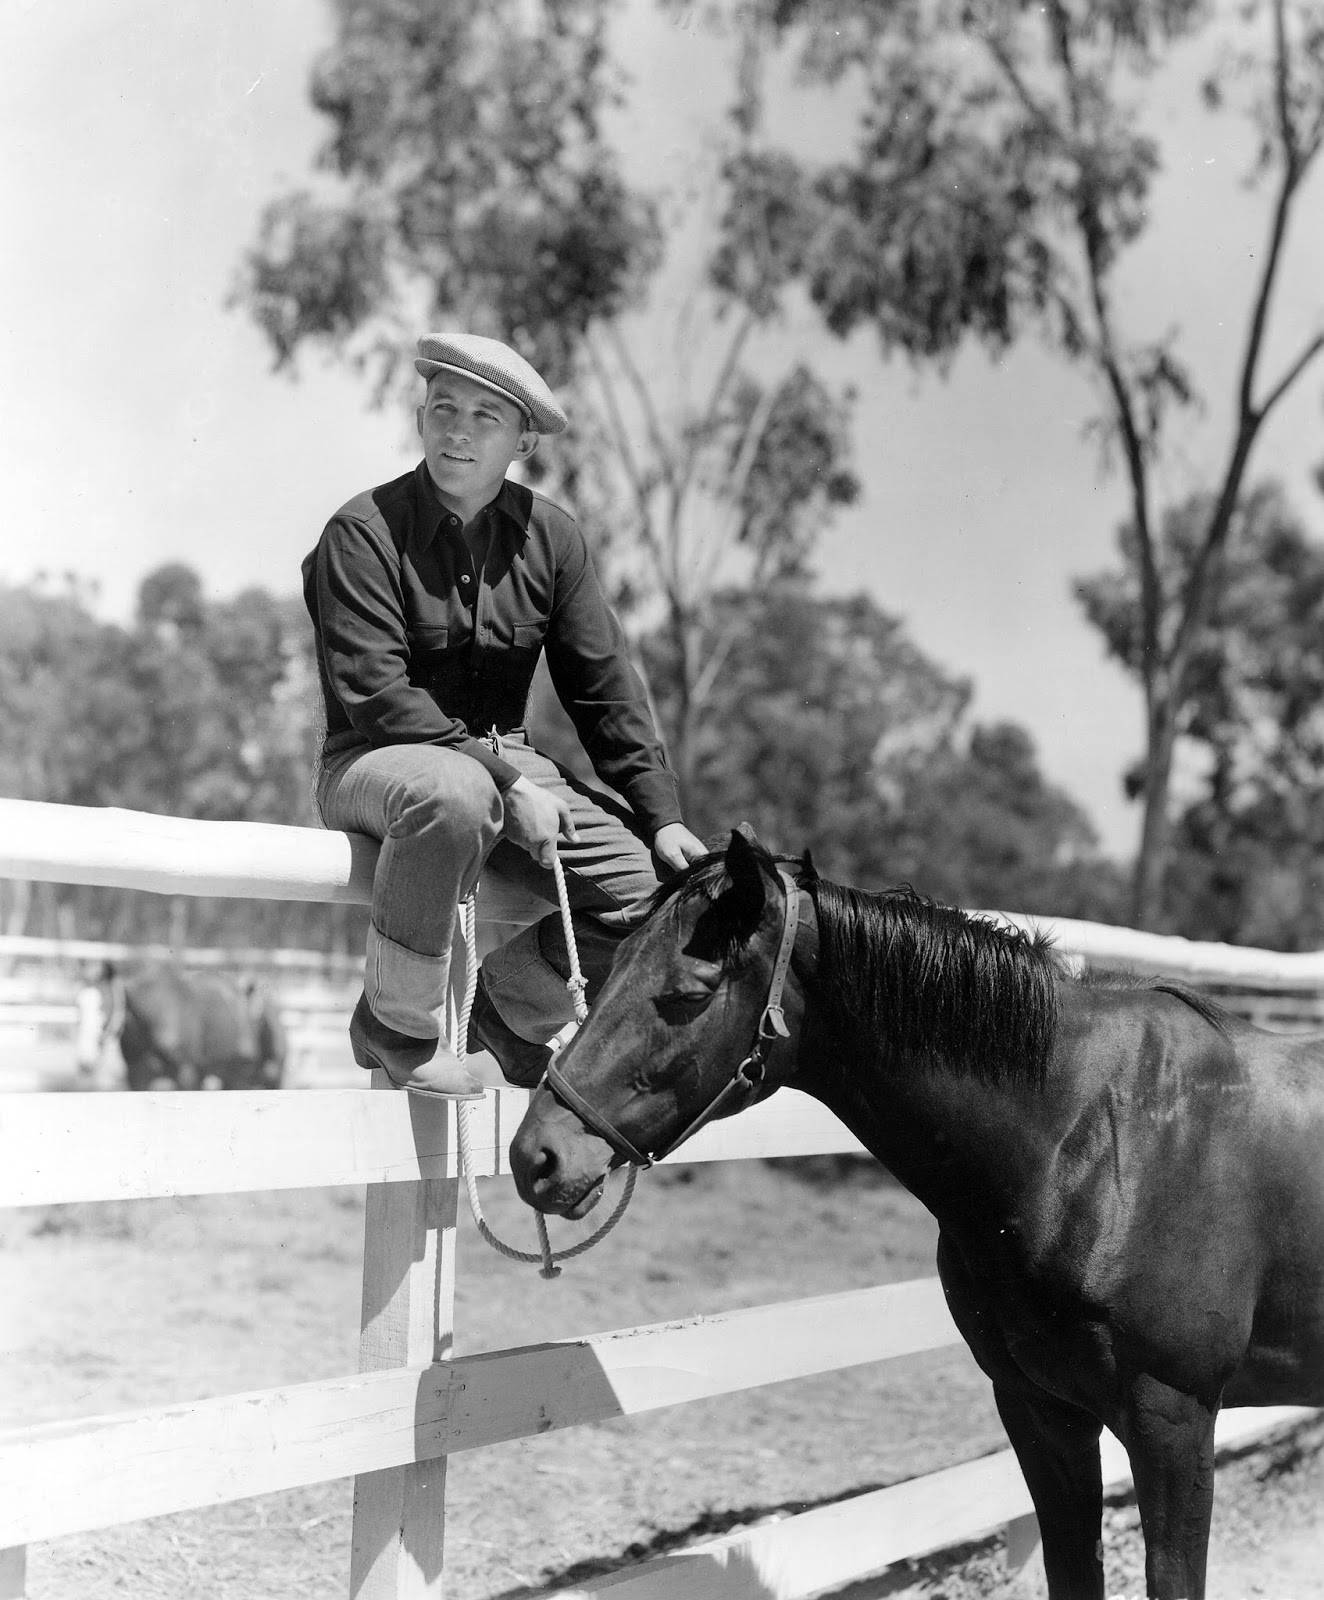 Bing Crosby and his horse. 1940s.